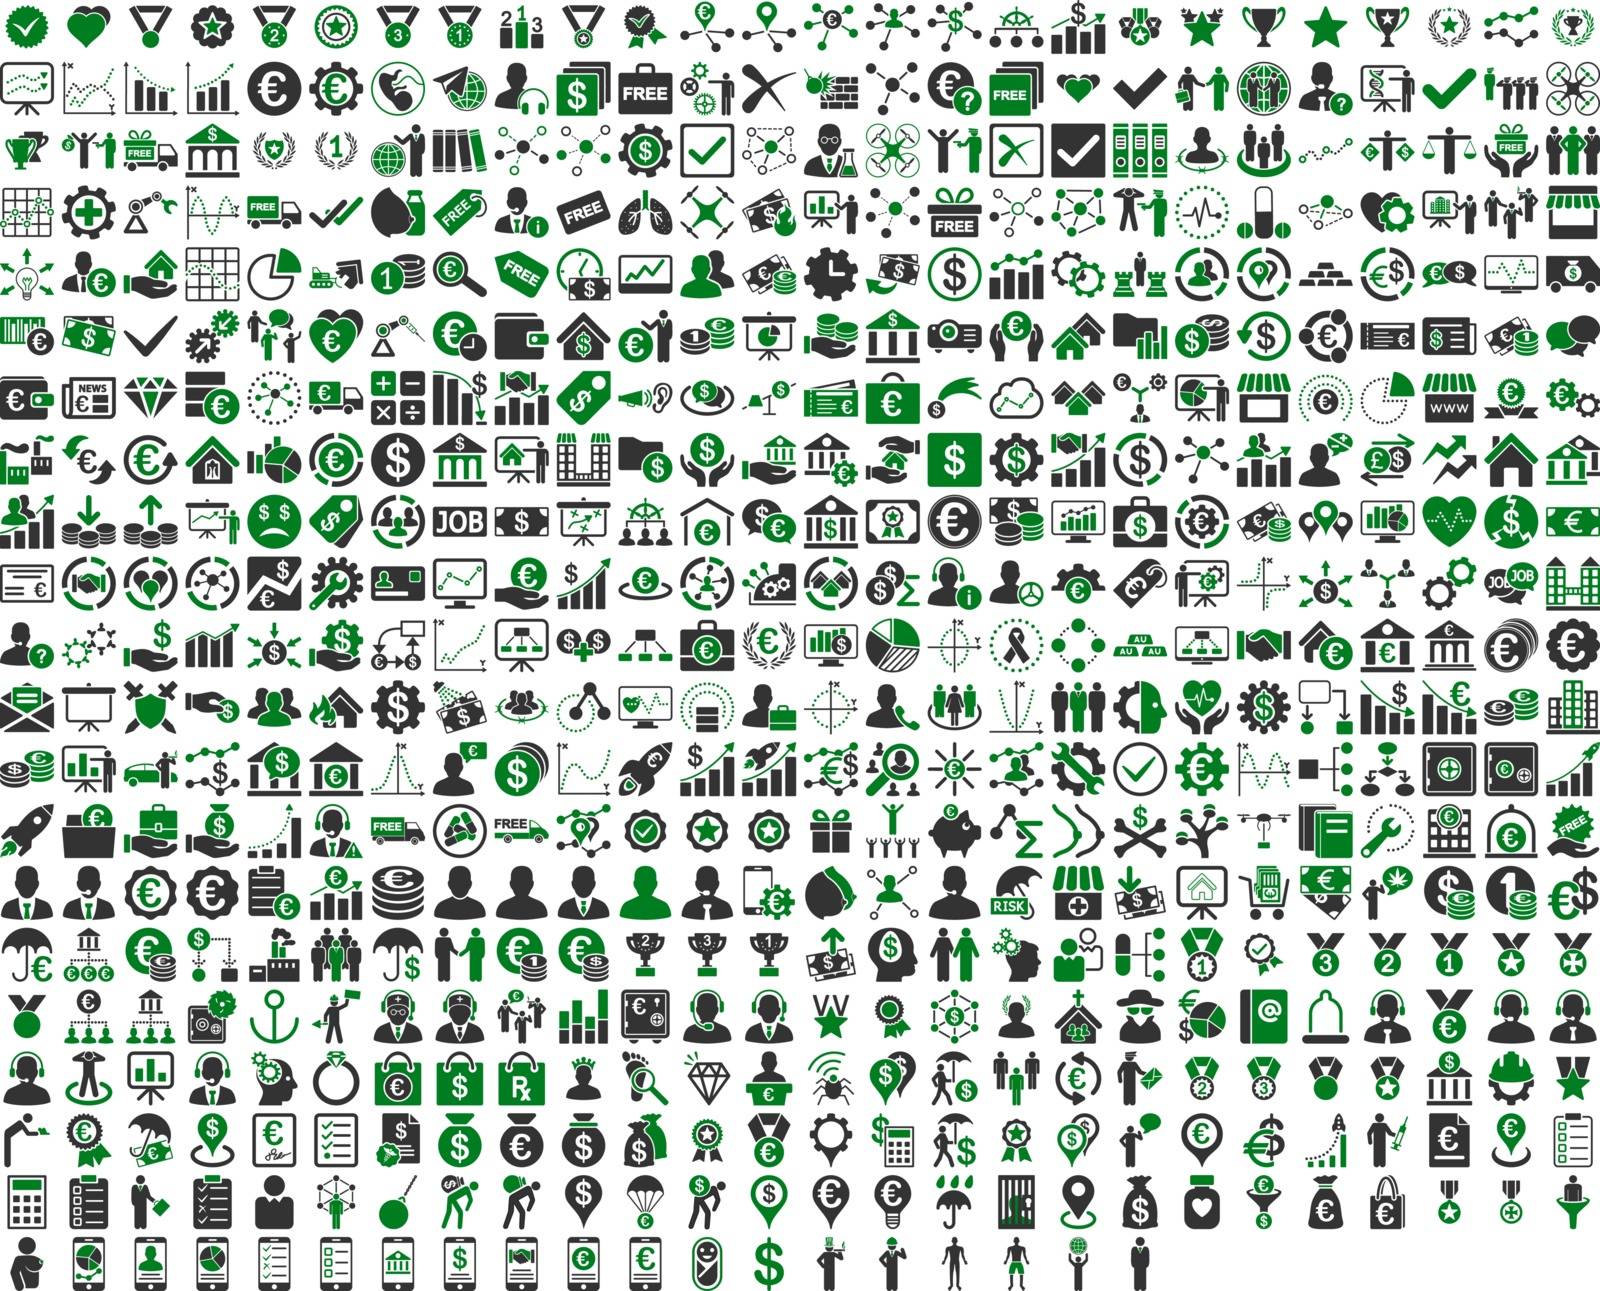 Application Toolbar Icons. 576 flat bicolor icons use green and gray colors. Vector images are isolated on a white background. 